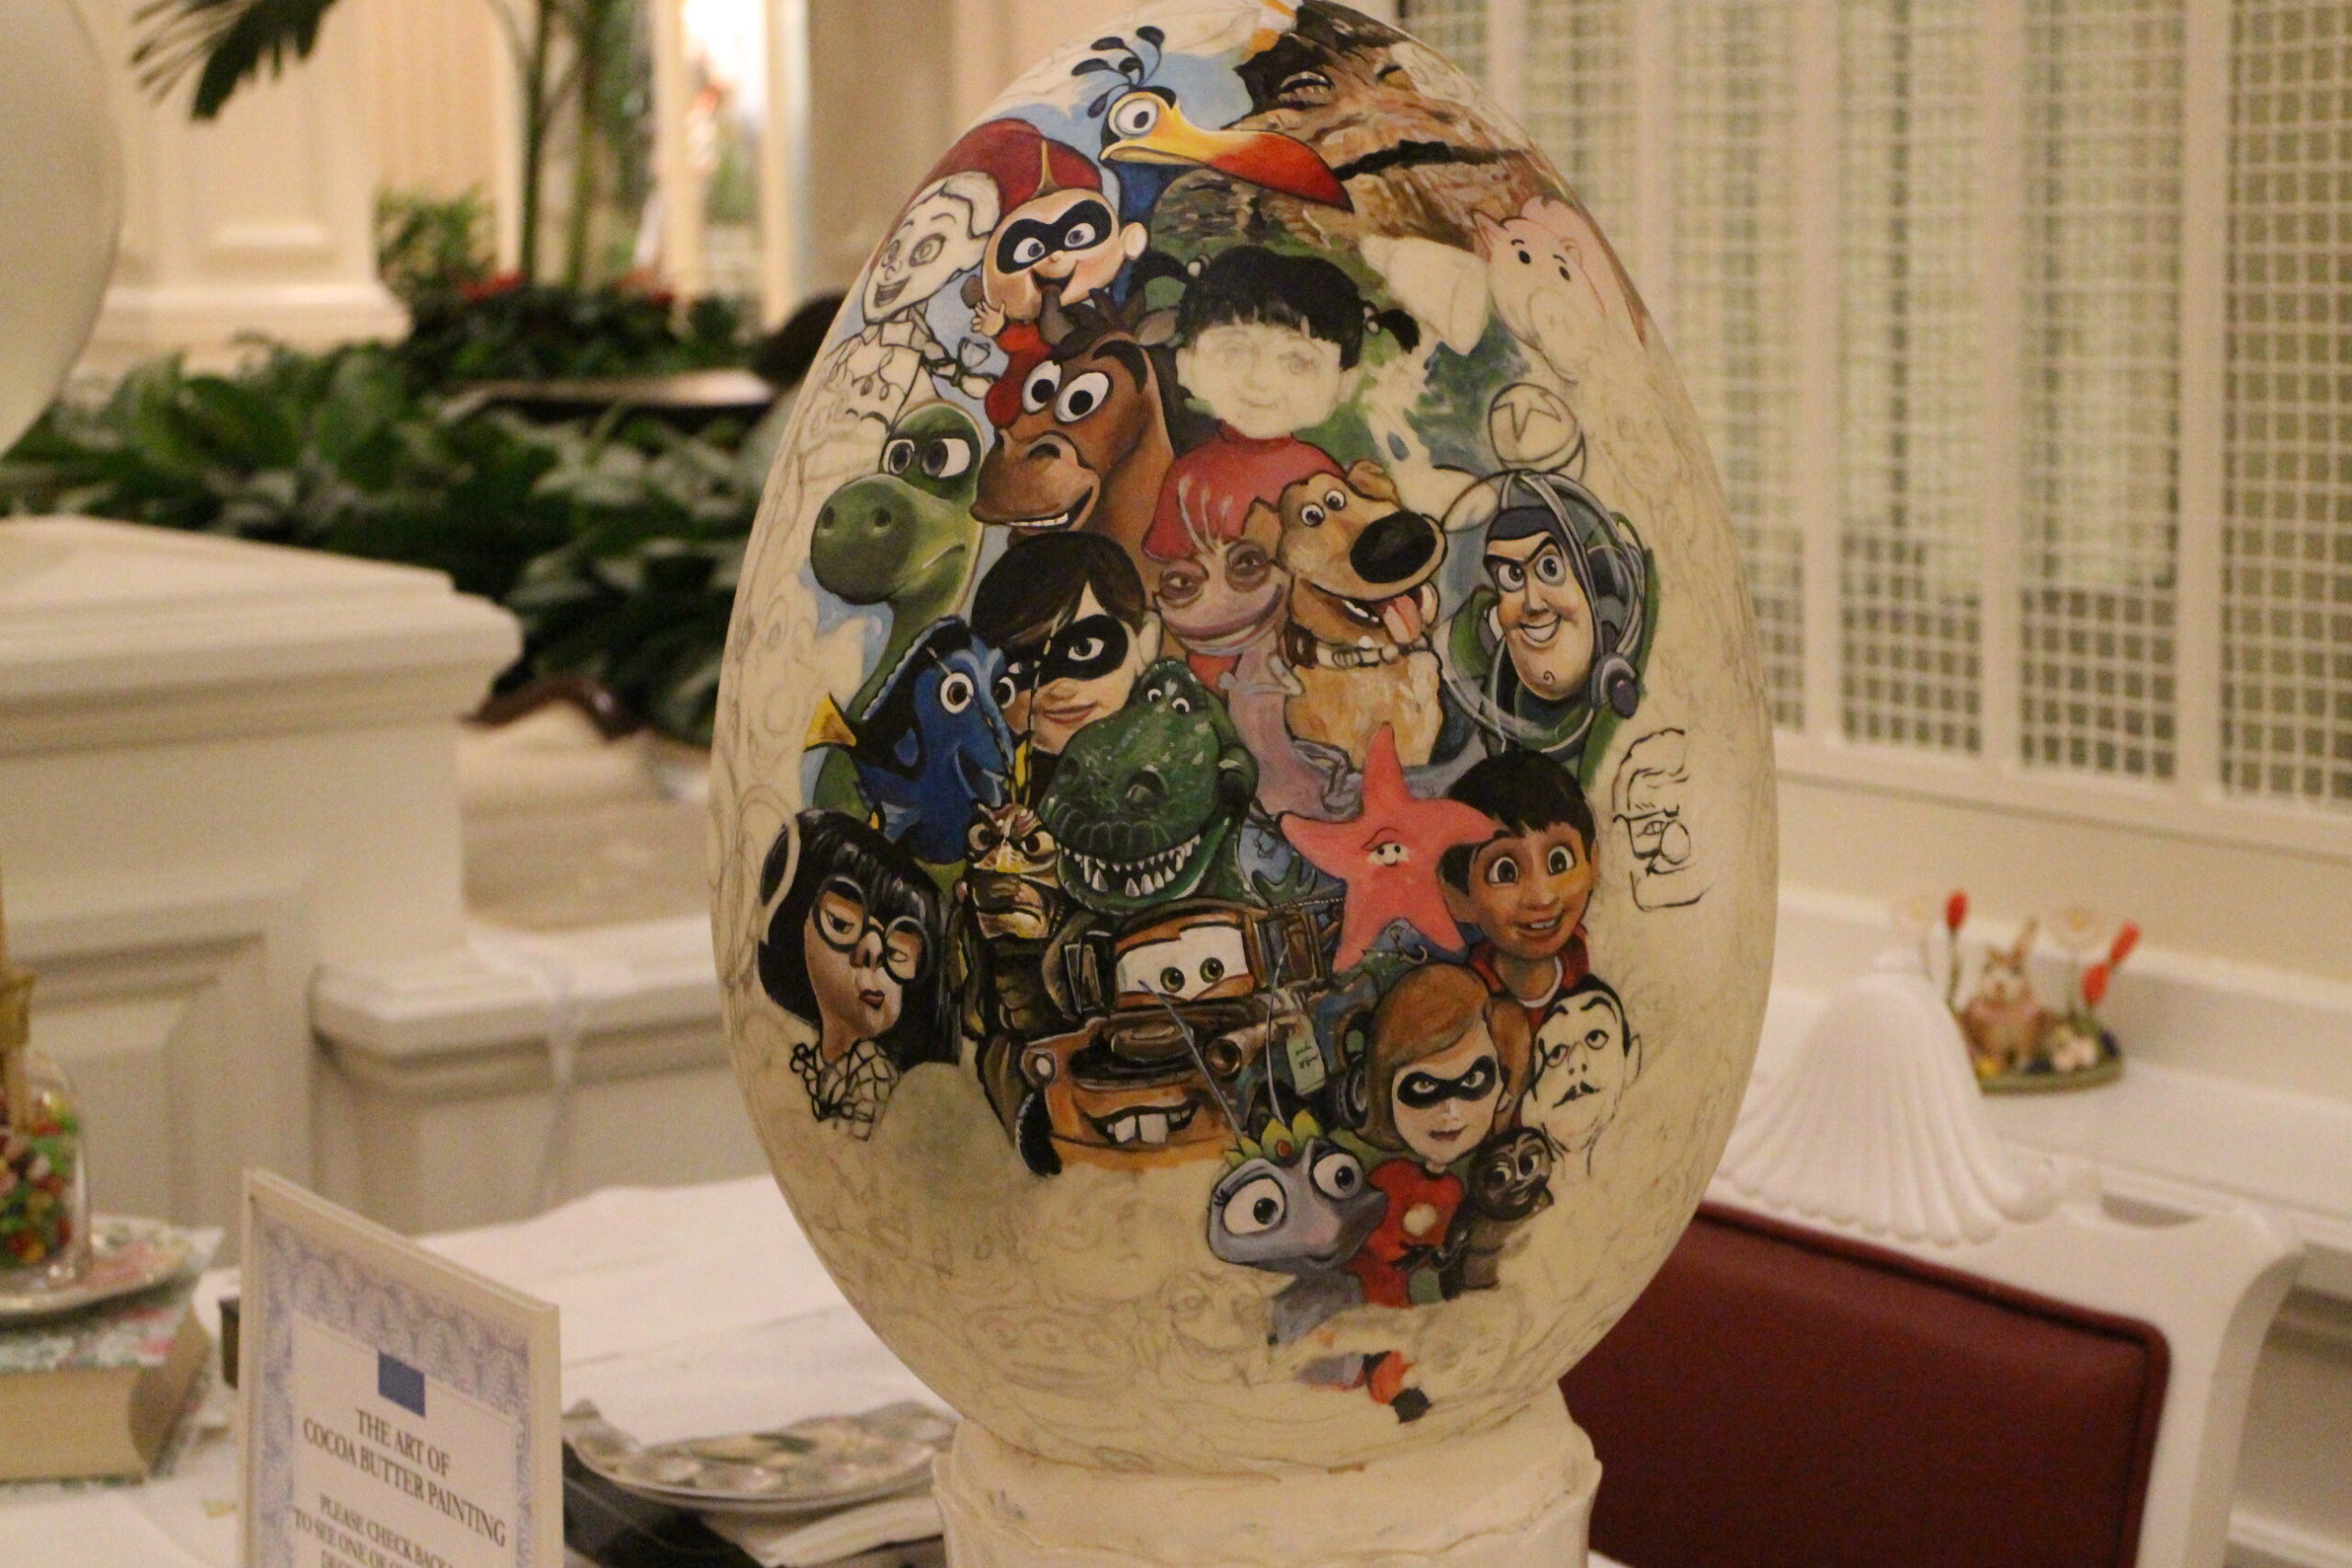 A large Easter egg sits on a table. It's off white with the faces of many Disney characters on it.